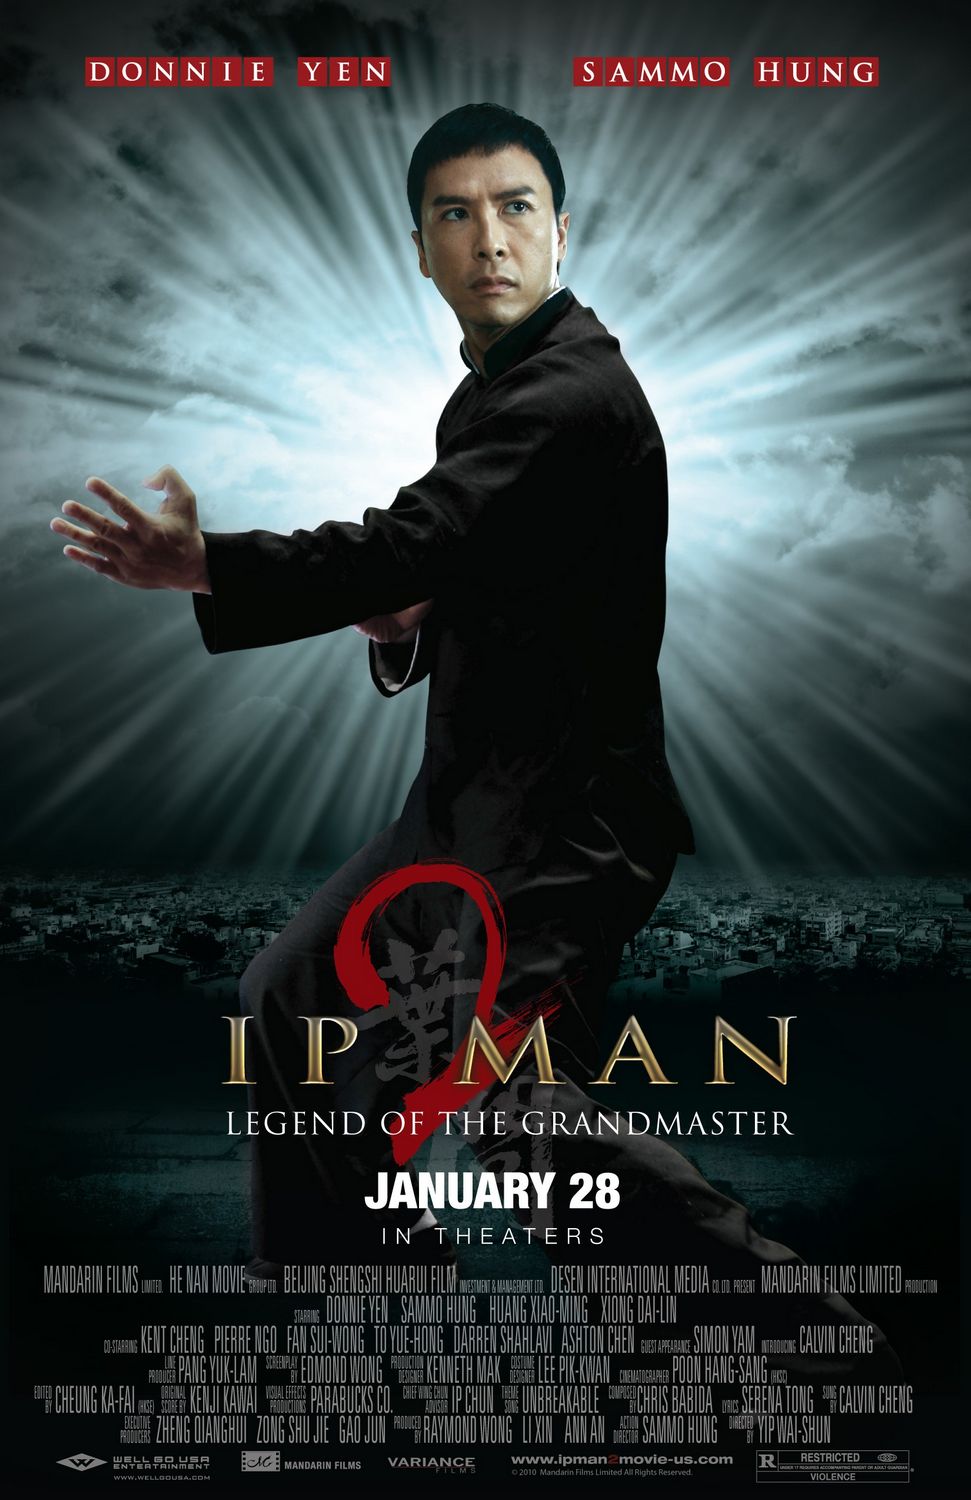 Extra Large Movie Poster Image for Yip Man 2 (#10 of 10)